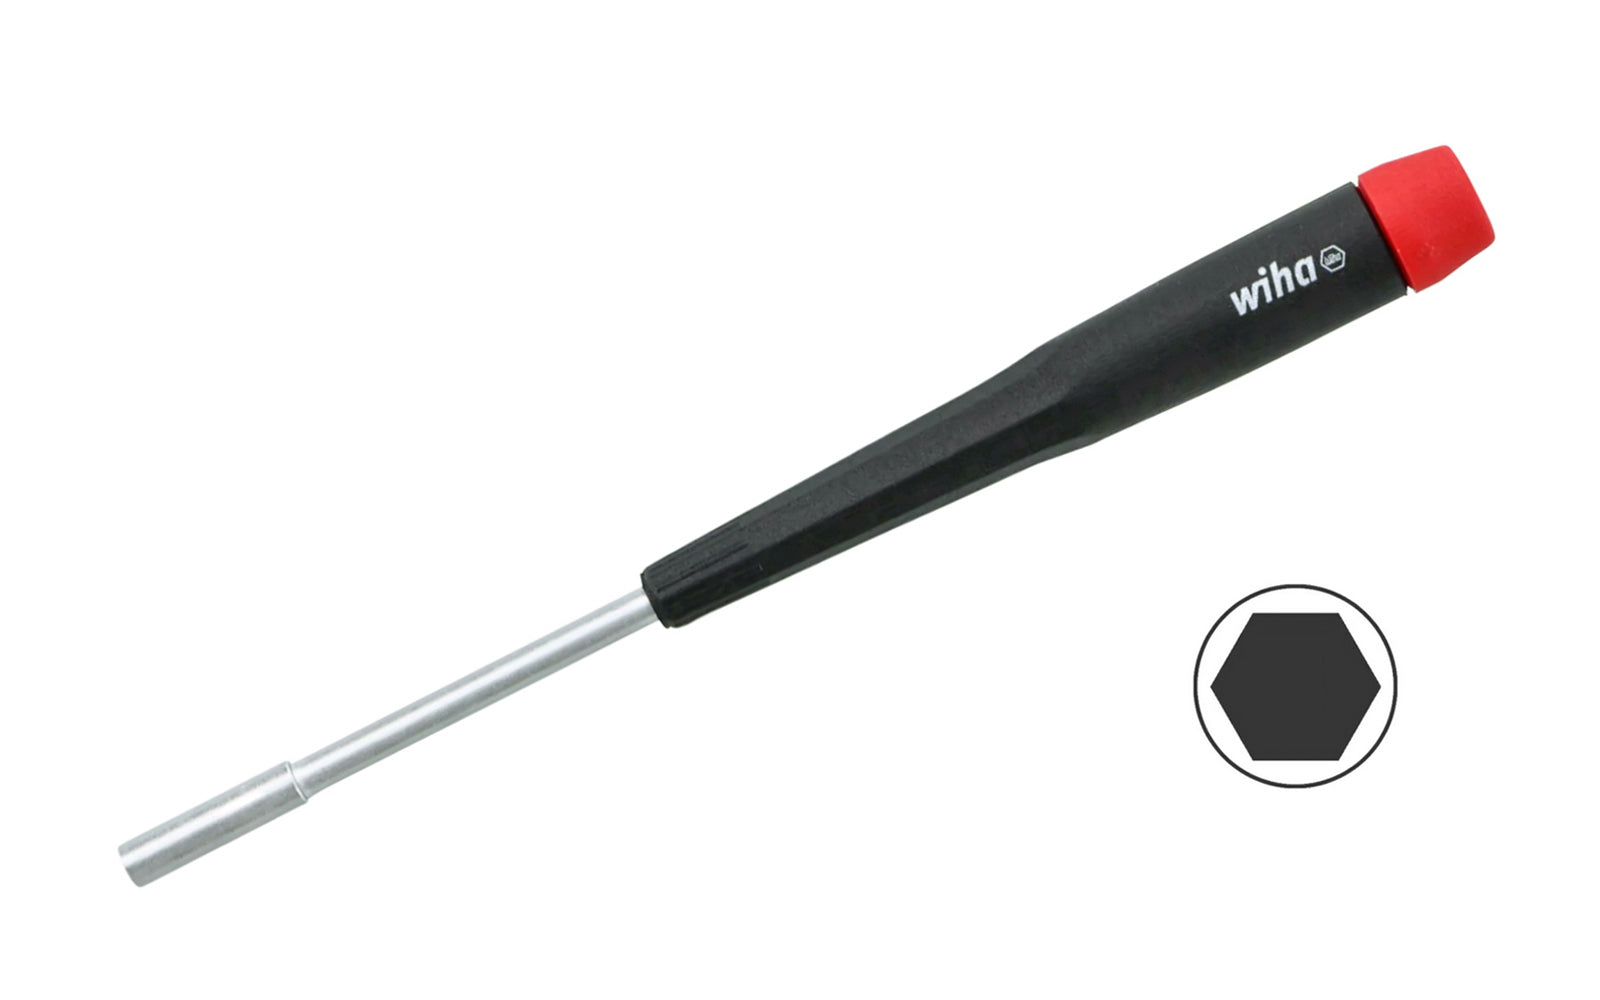 A high quality Wiha precision metric nut driver made out of hardened CRM72 tool steel. The classic precision style screwdriver has a hex profile finger grip for precise torque, a tapered handle, & a smooth-turning cap for rapid rotation. Precision Nut Driver Screwdriver.   Made in Germany.